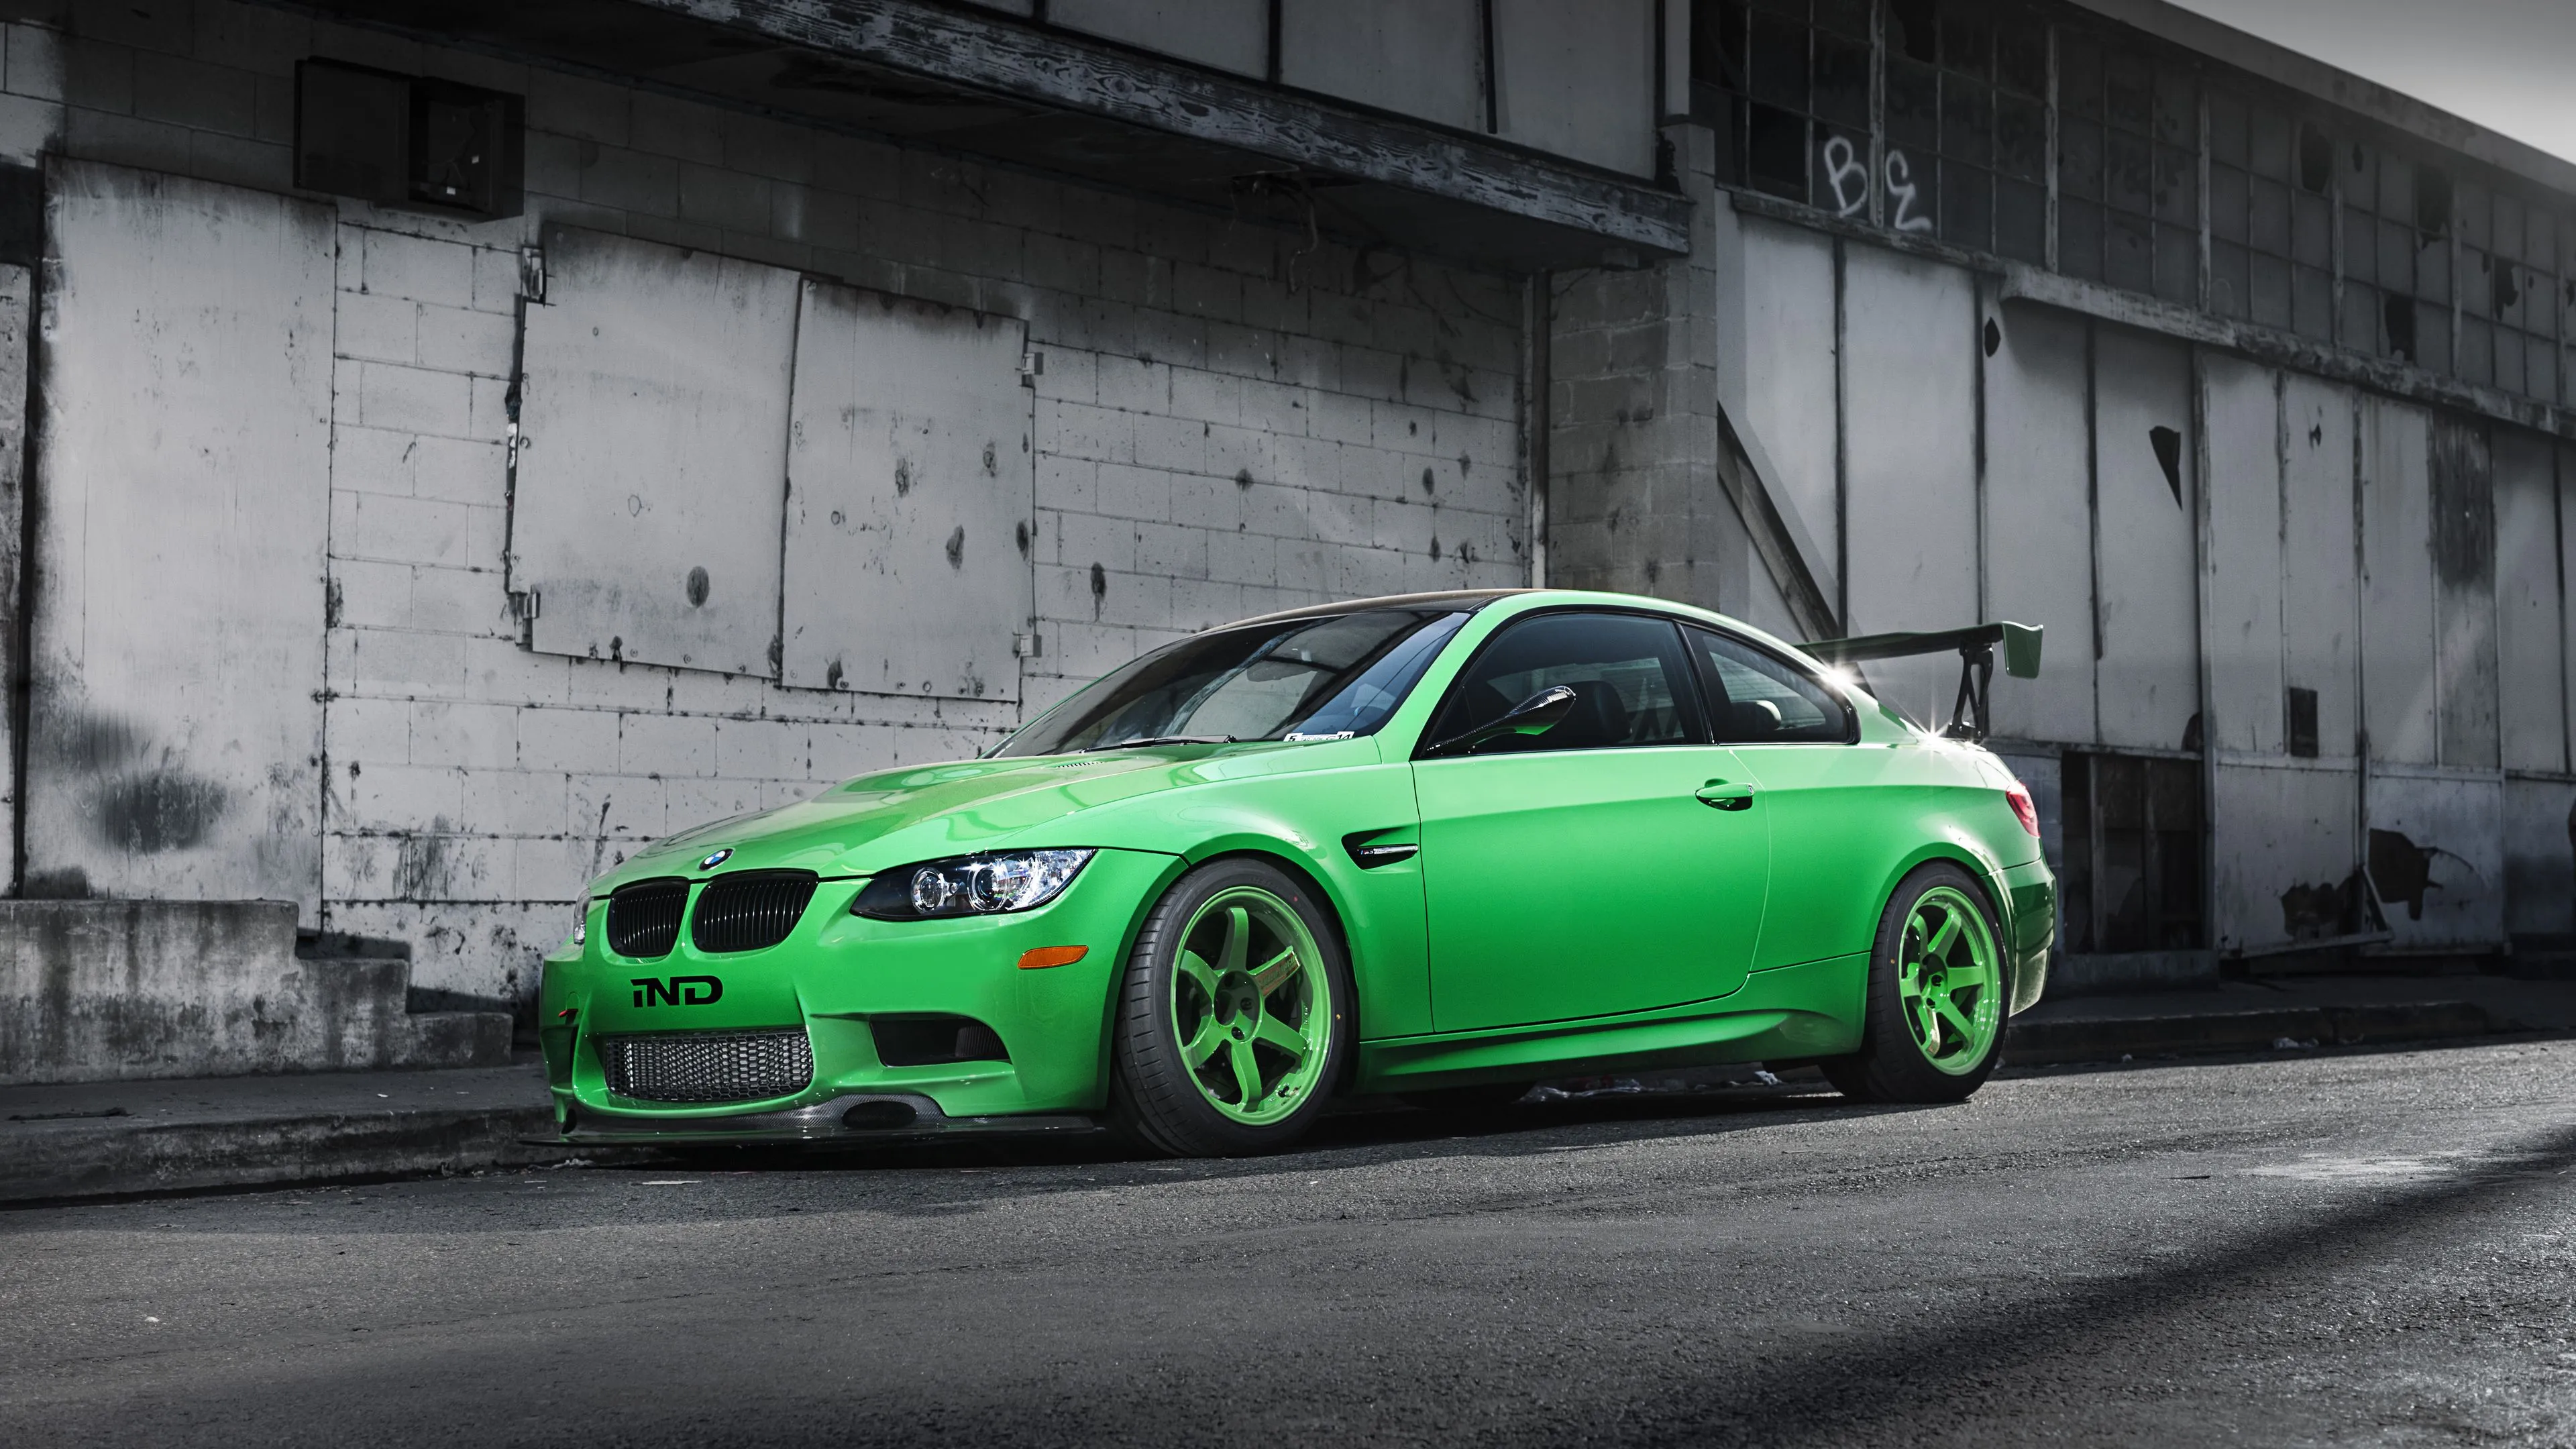 bmw m3 e92 green side view wing shadow building 4k 1691828627